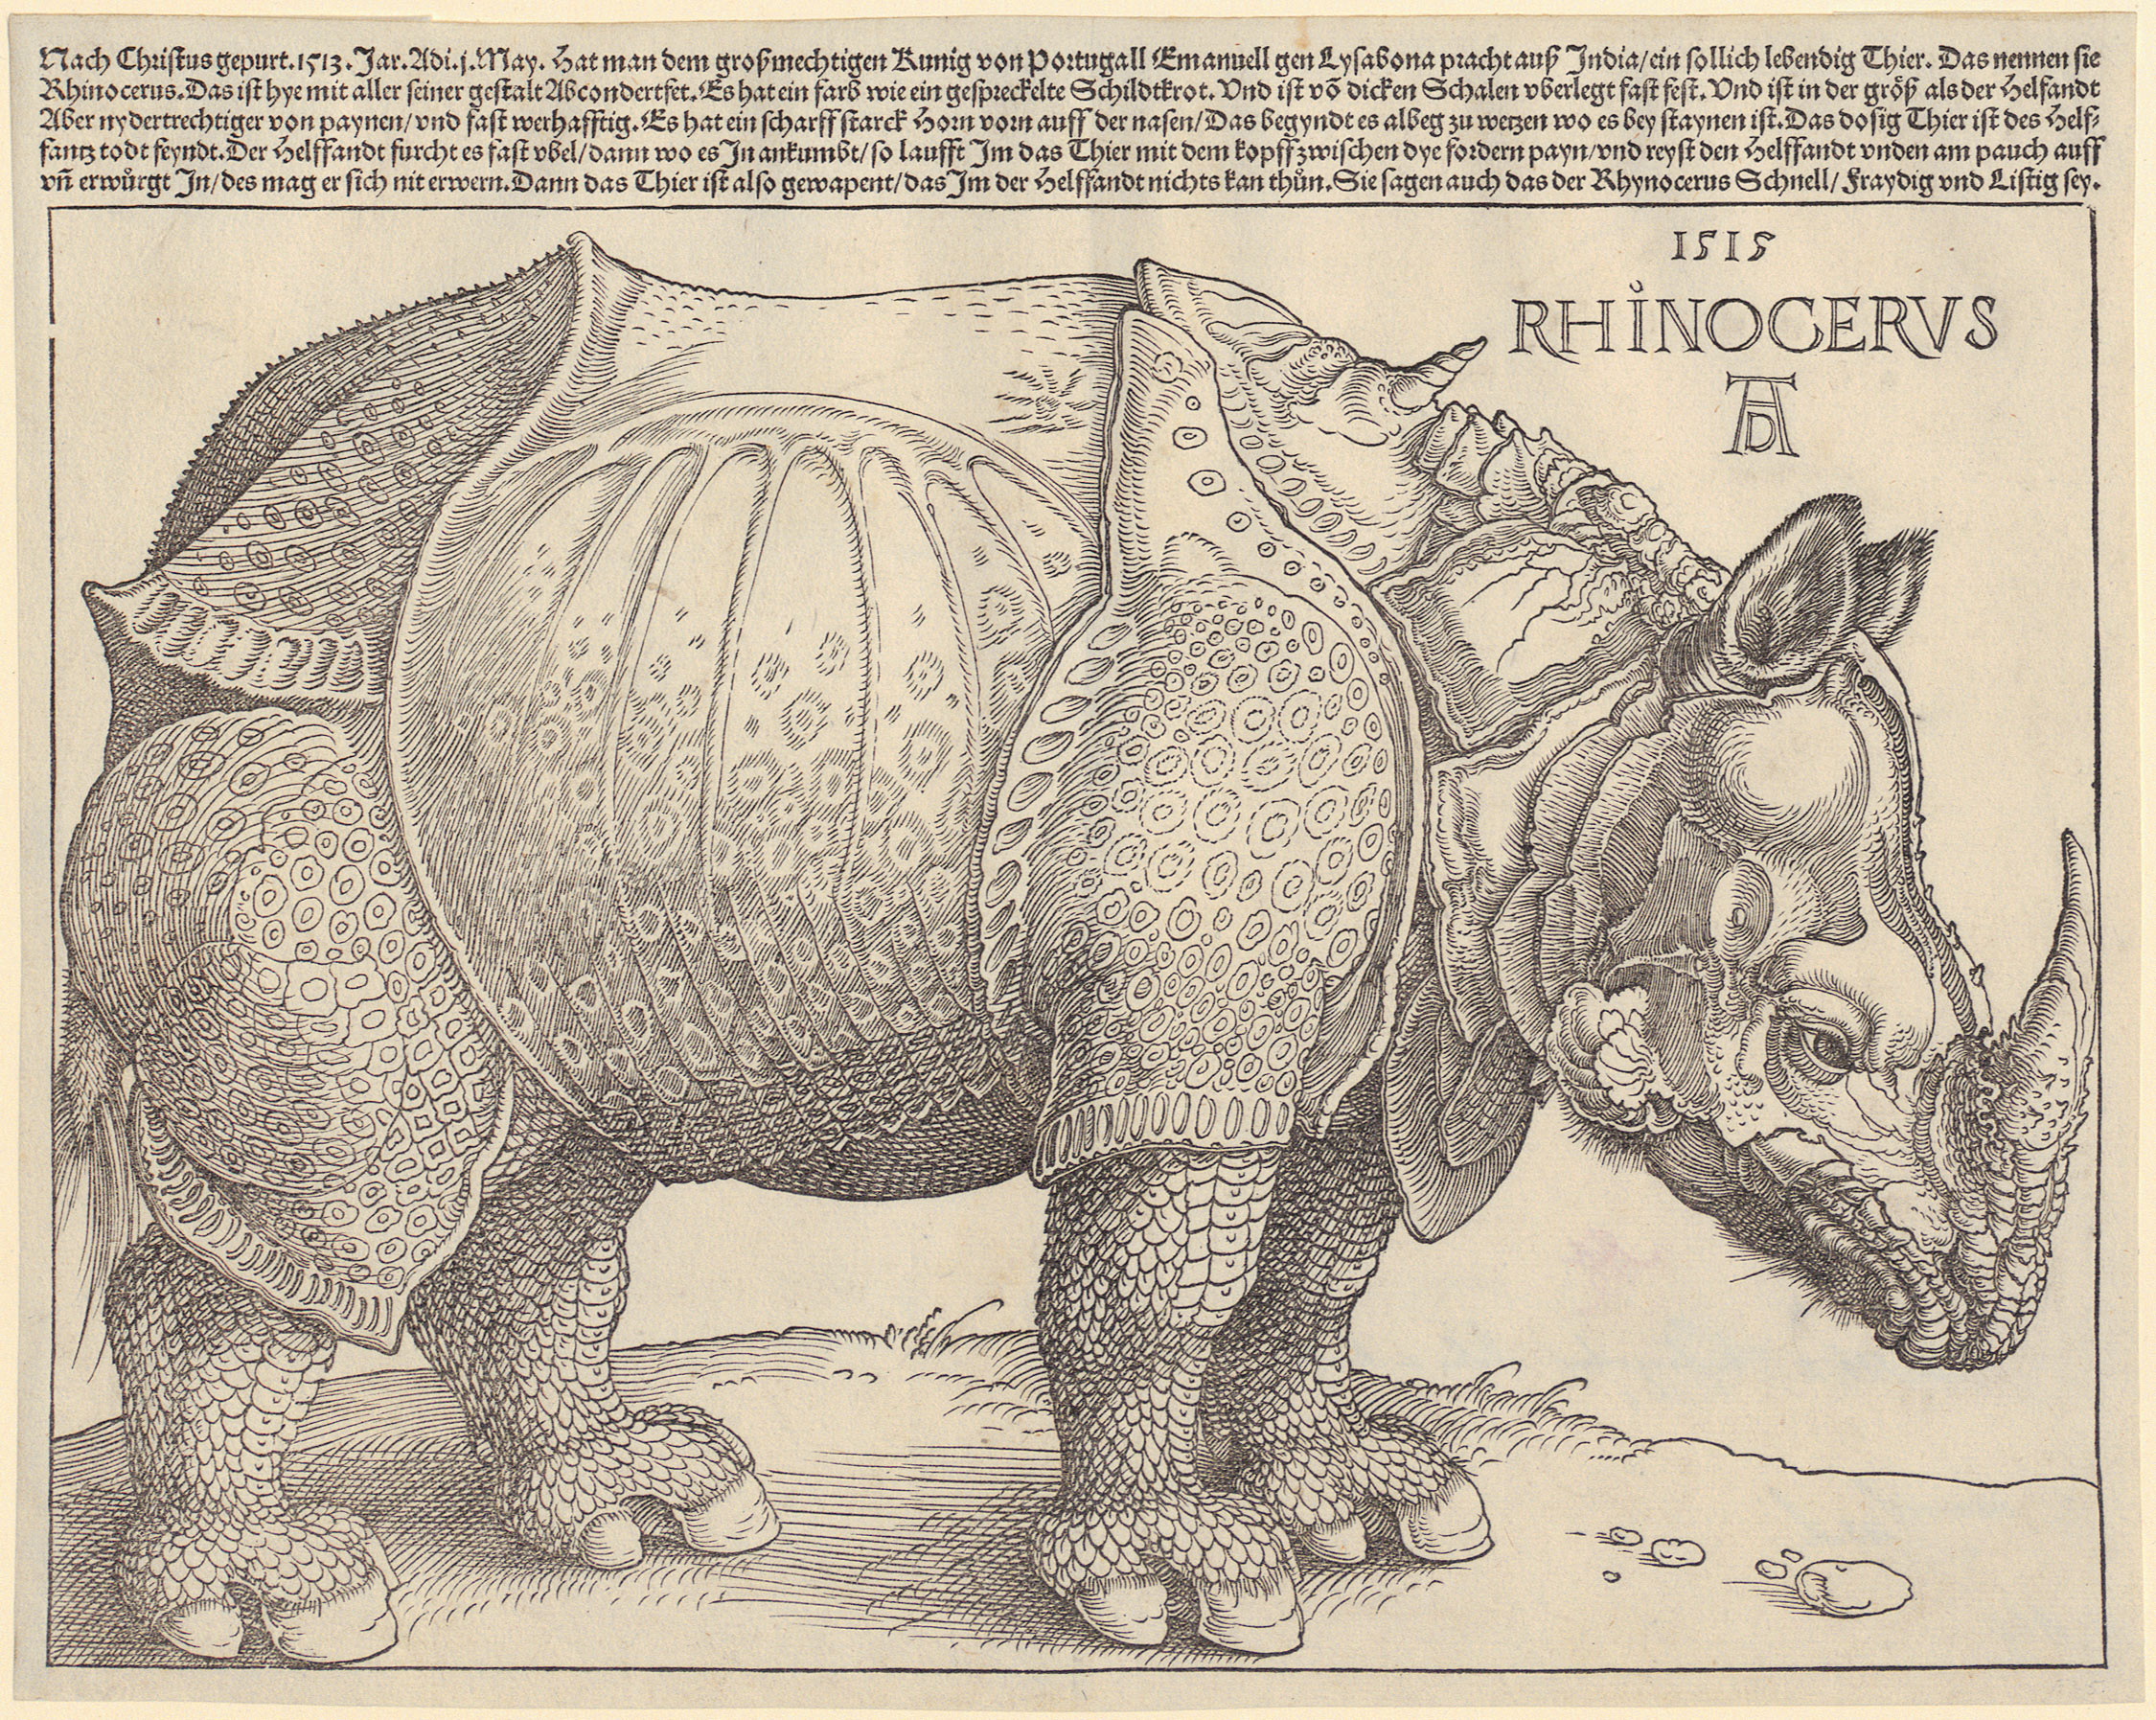 This image shows a digital version of Albrecht Dürer's Rhinocerus from 1515.